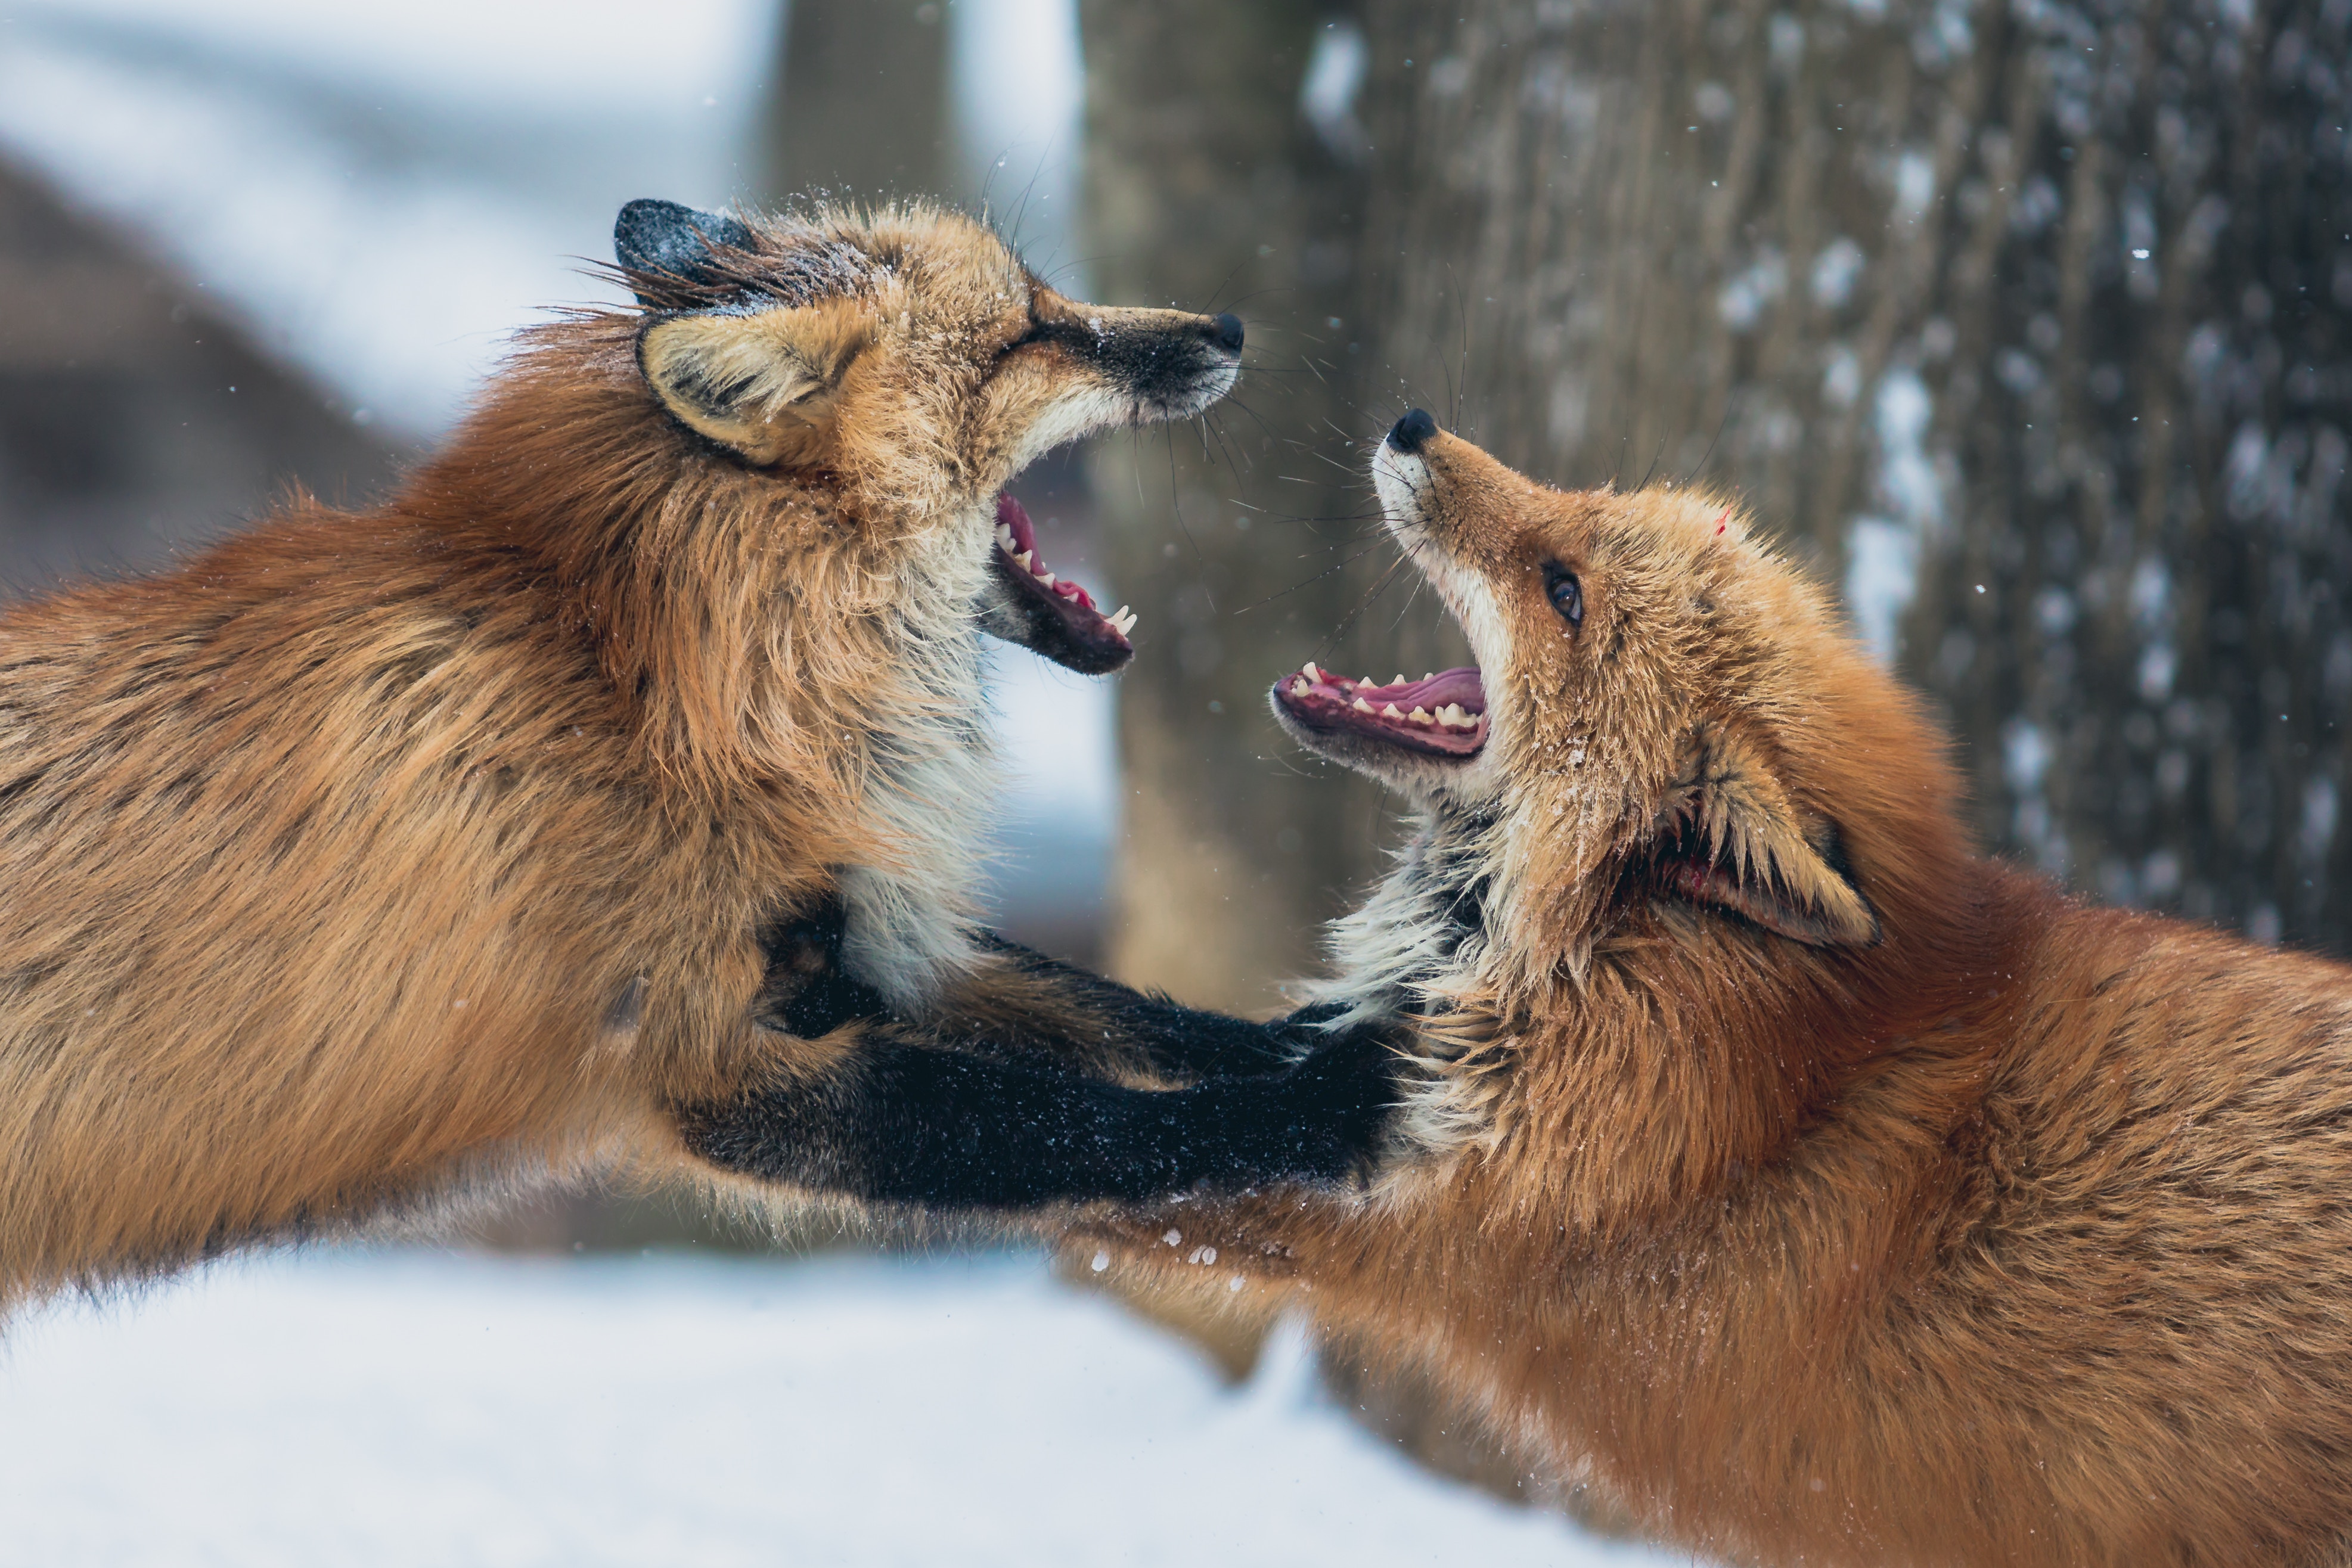 Two foxes fighting with their mouths open